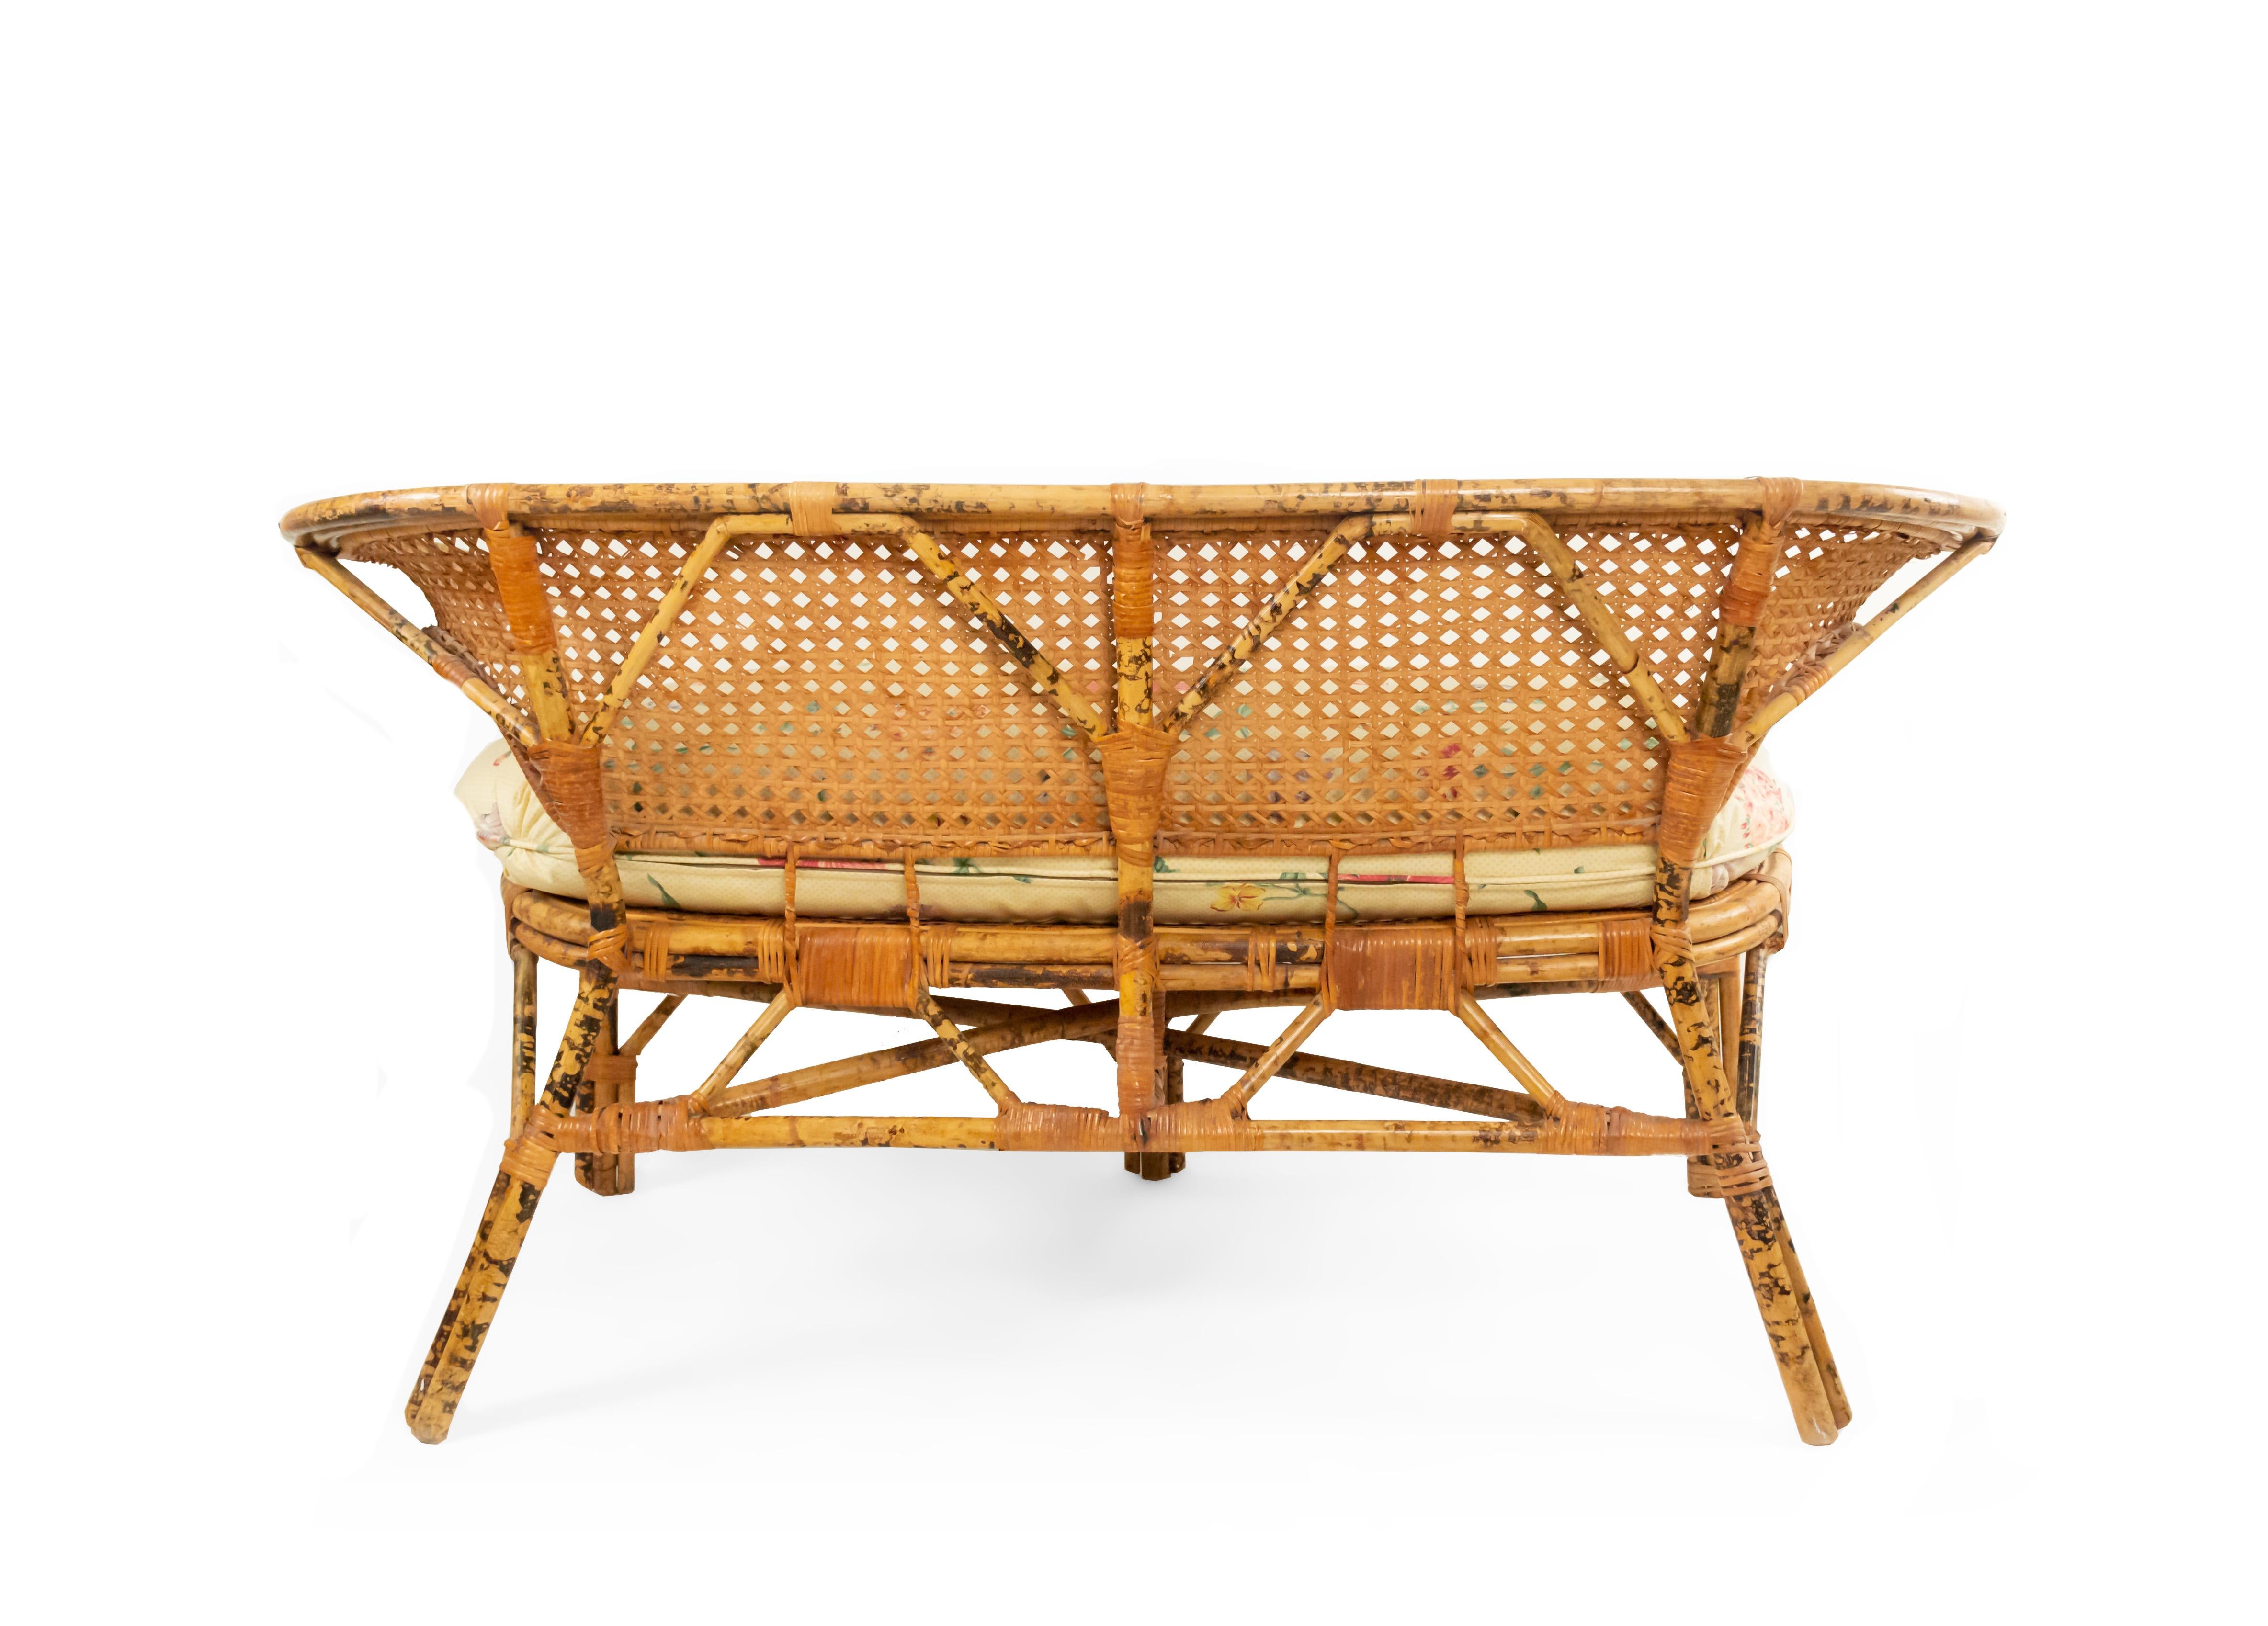 Midcentury Wicker Love Seat with Floral Upholstery In Good Condition For Sale In New York, NY